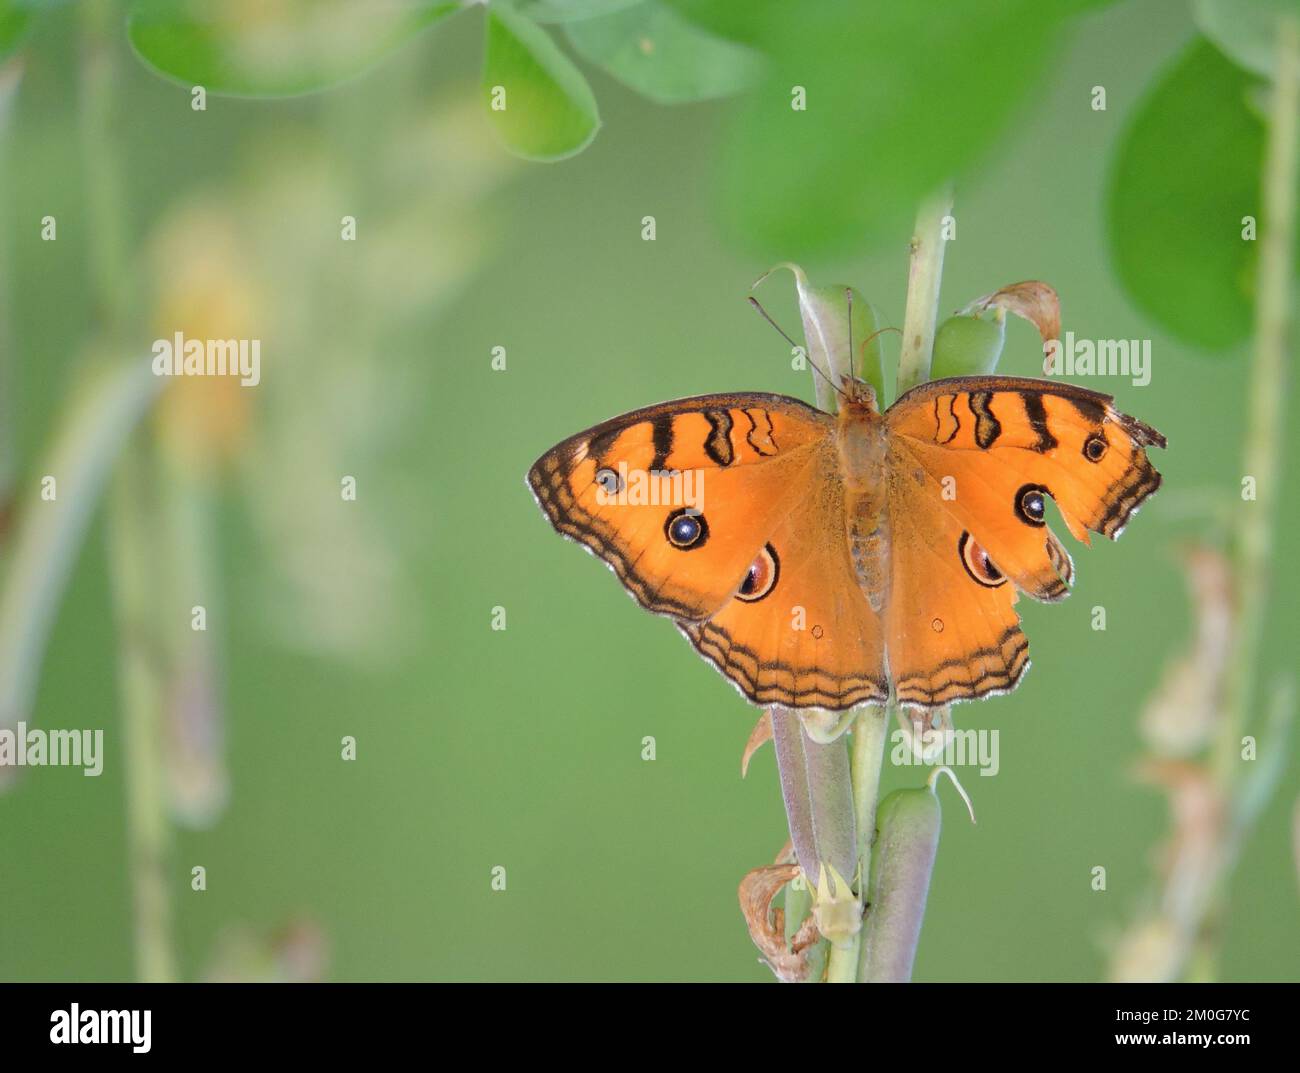 Junonia almana, the peacock pansy, is a species of nymphalid butterfly found in Cambodia and South Asia. Stock Photo